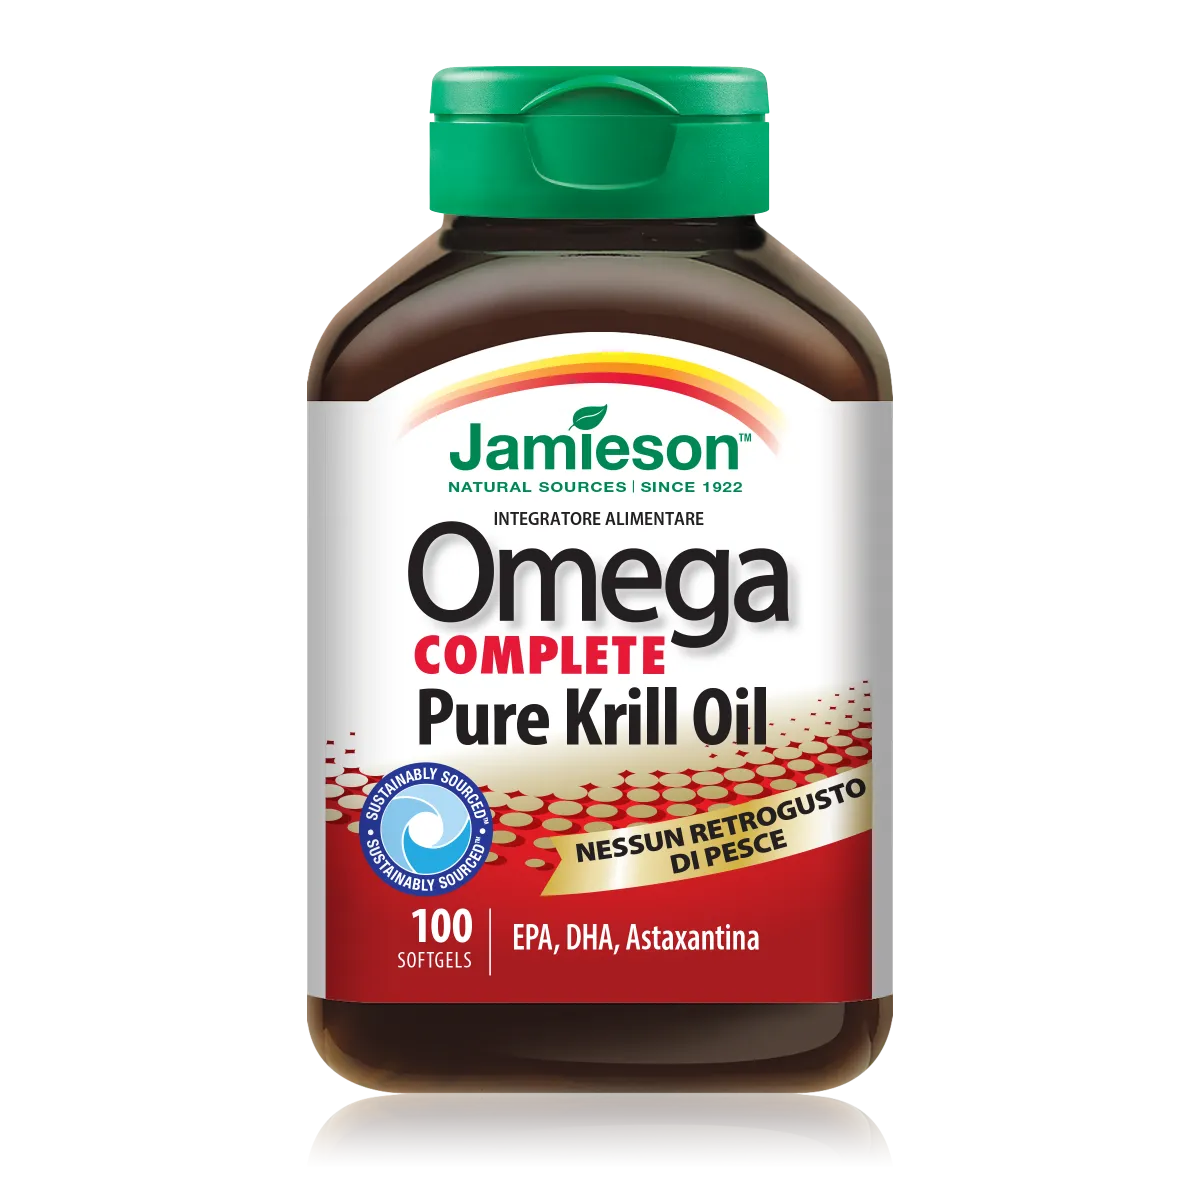 JAMIESON OMEGA COMPLETE PURE KRILL OIL 100 SOFTGELS